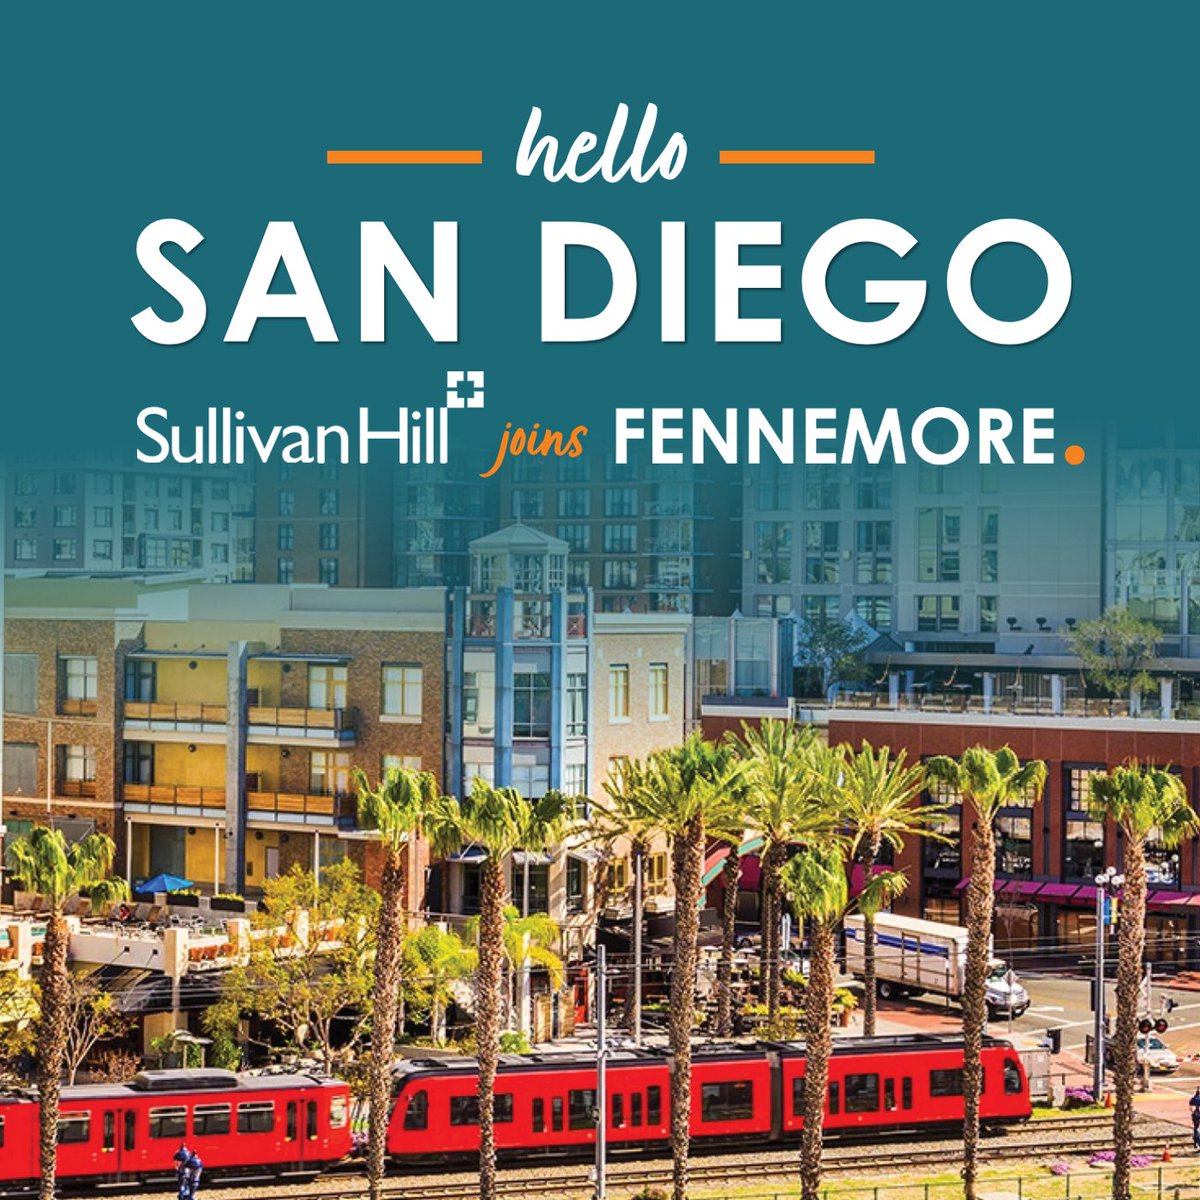 We'd like to officially welcome the Sullivan Hill staff to the Fennemore team. These legal professionals are among the best of the best in Southern California, and we are beyond excited to have them on our team. 
ow.ly/SNwt50QKQEb

#LegalProfessionals #SanDiego #Fennemore